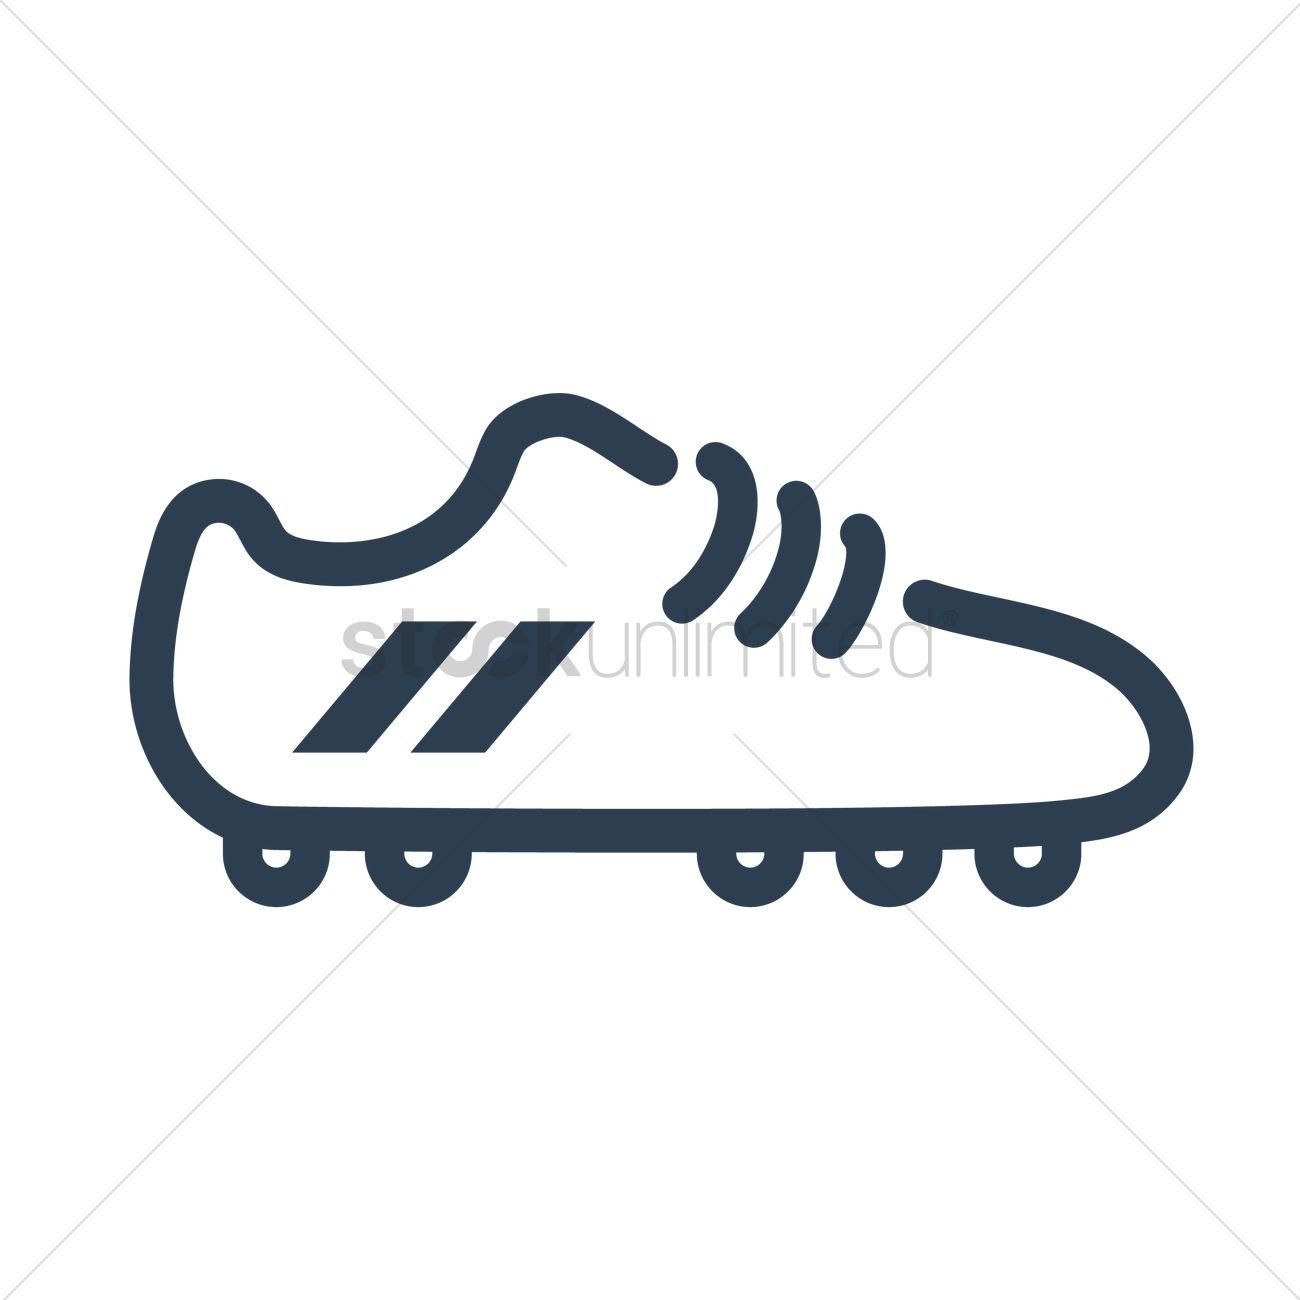 Cleats Logo - Football cleats icon Vector Image - 1985035 | StockUnlimited